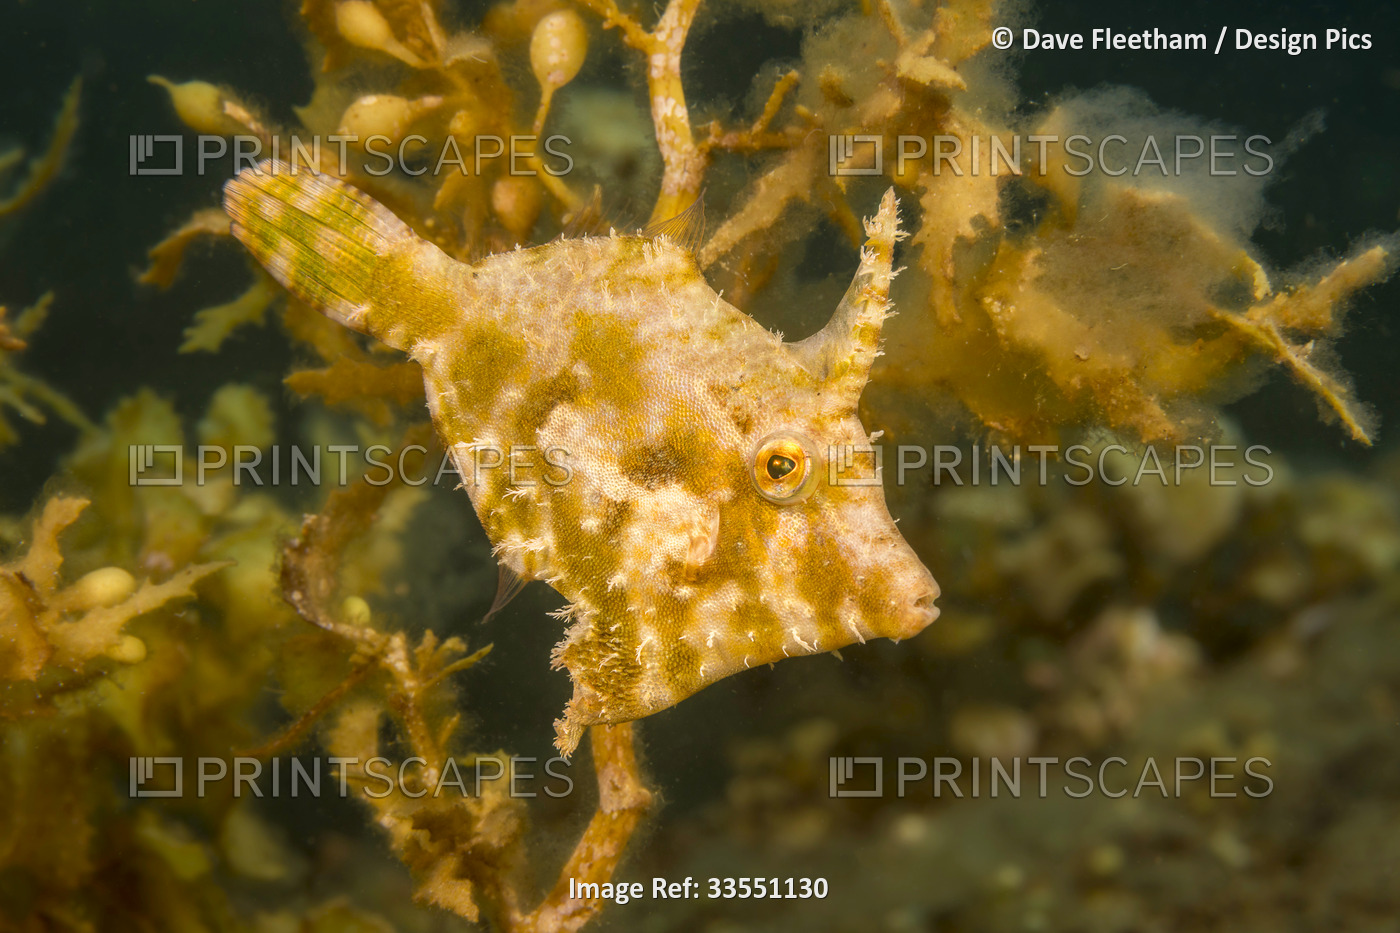 The Bristle-tailed filefish (Acreichthys tomentosus) is also referred to as the ...